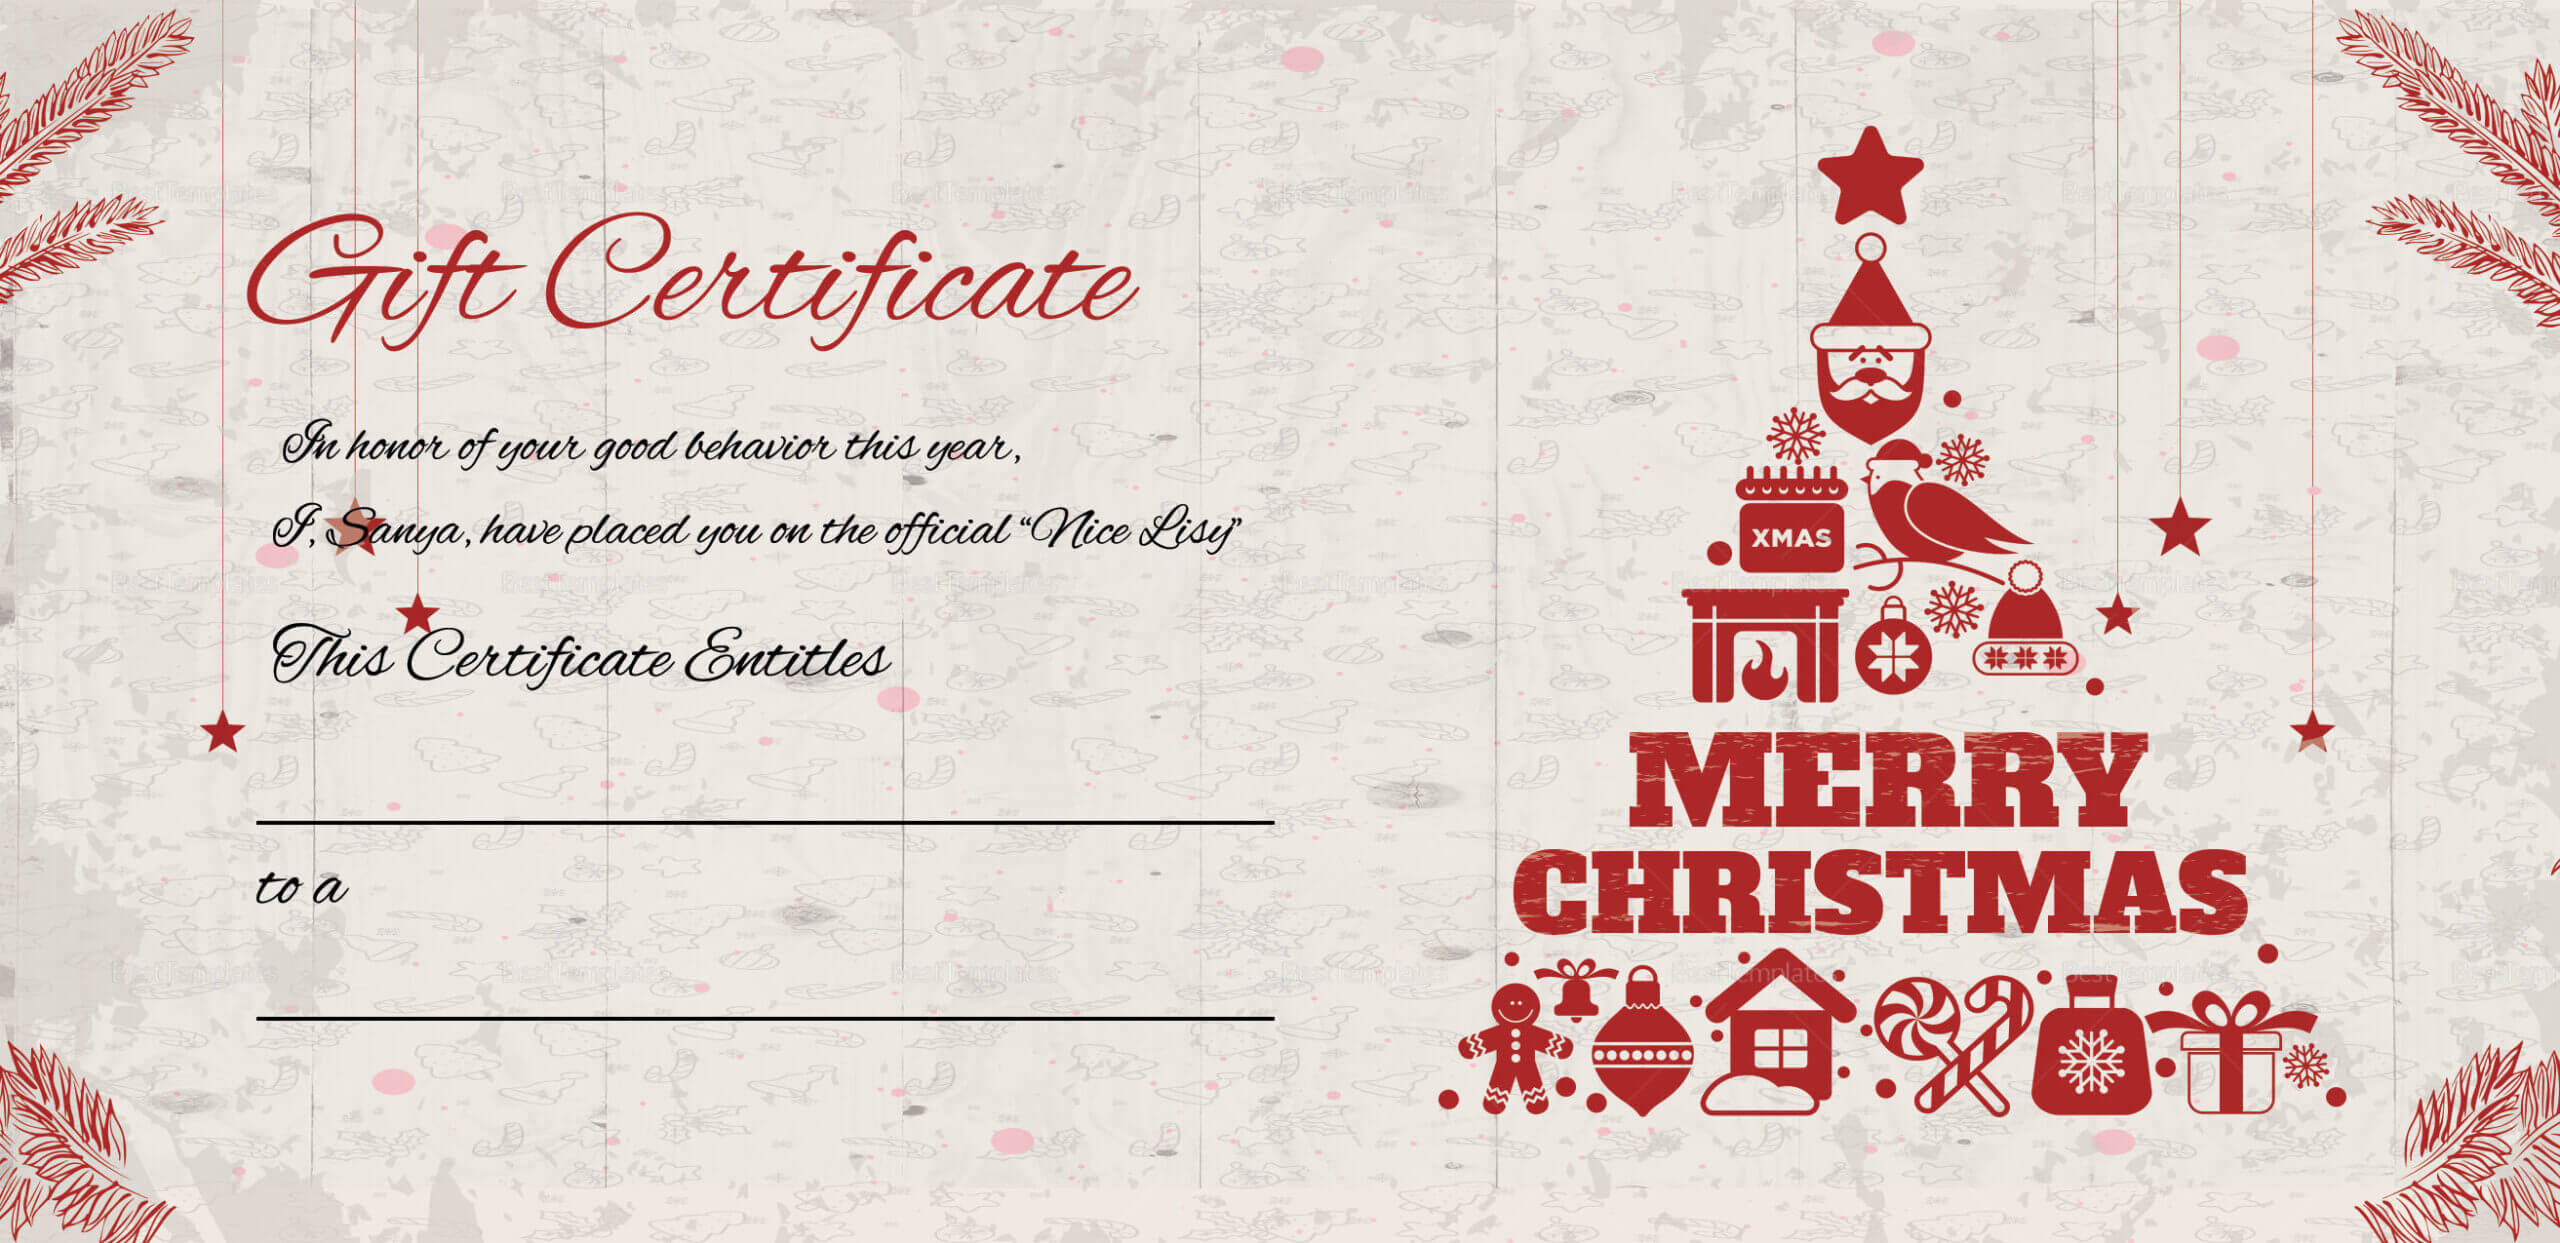 Merry Christmas Gift Certificate In Merry Christmas Gift Certificate Templates